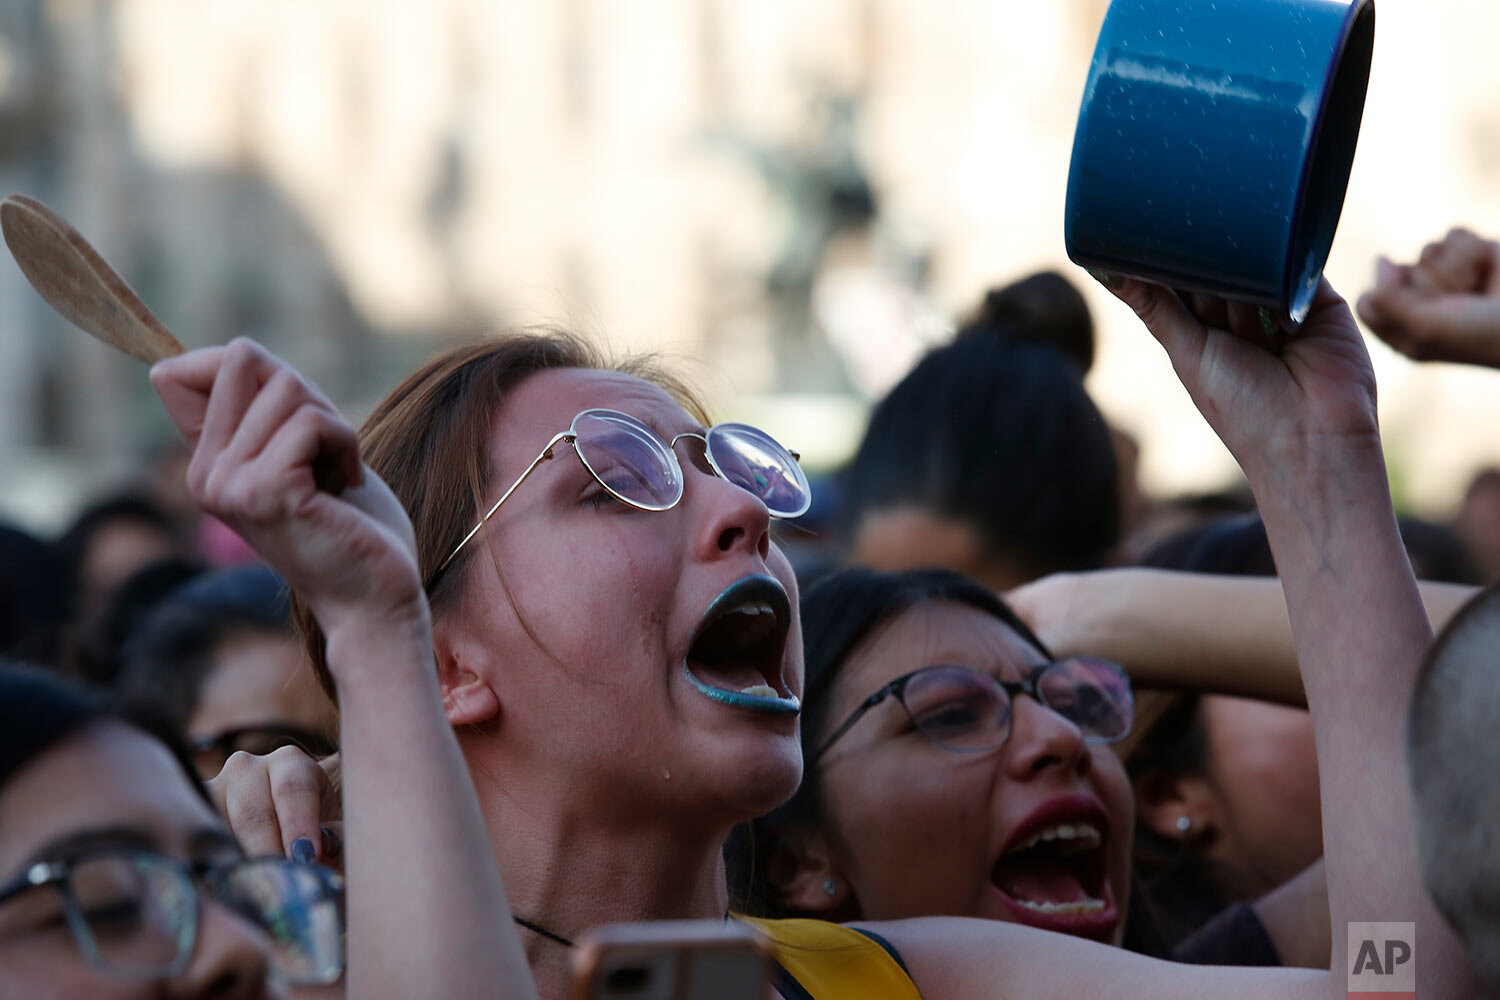  Women protest against the latest murder of two women, in Mexico City, Saturday, Jan. 25, 2020. During the past couple of weeks two women activists, attorney Yunuen Lopez Sanchez and Isabel Cabanillas de la Torre where both murdered by unknown assail